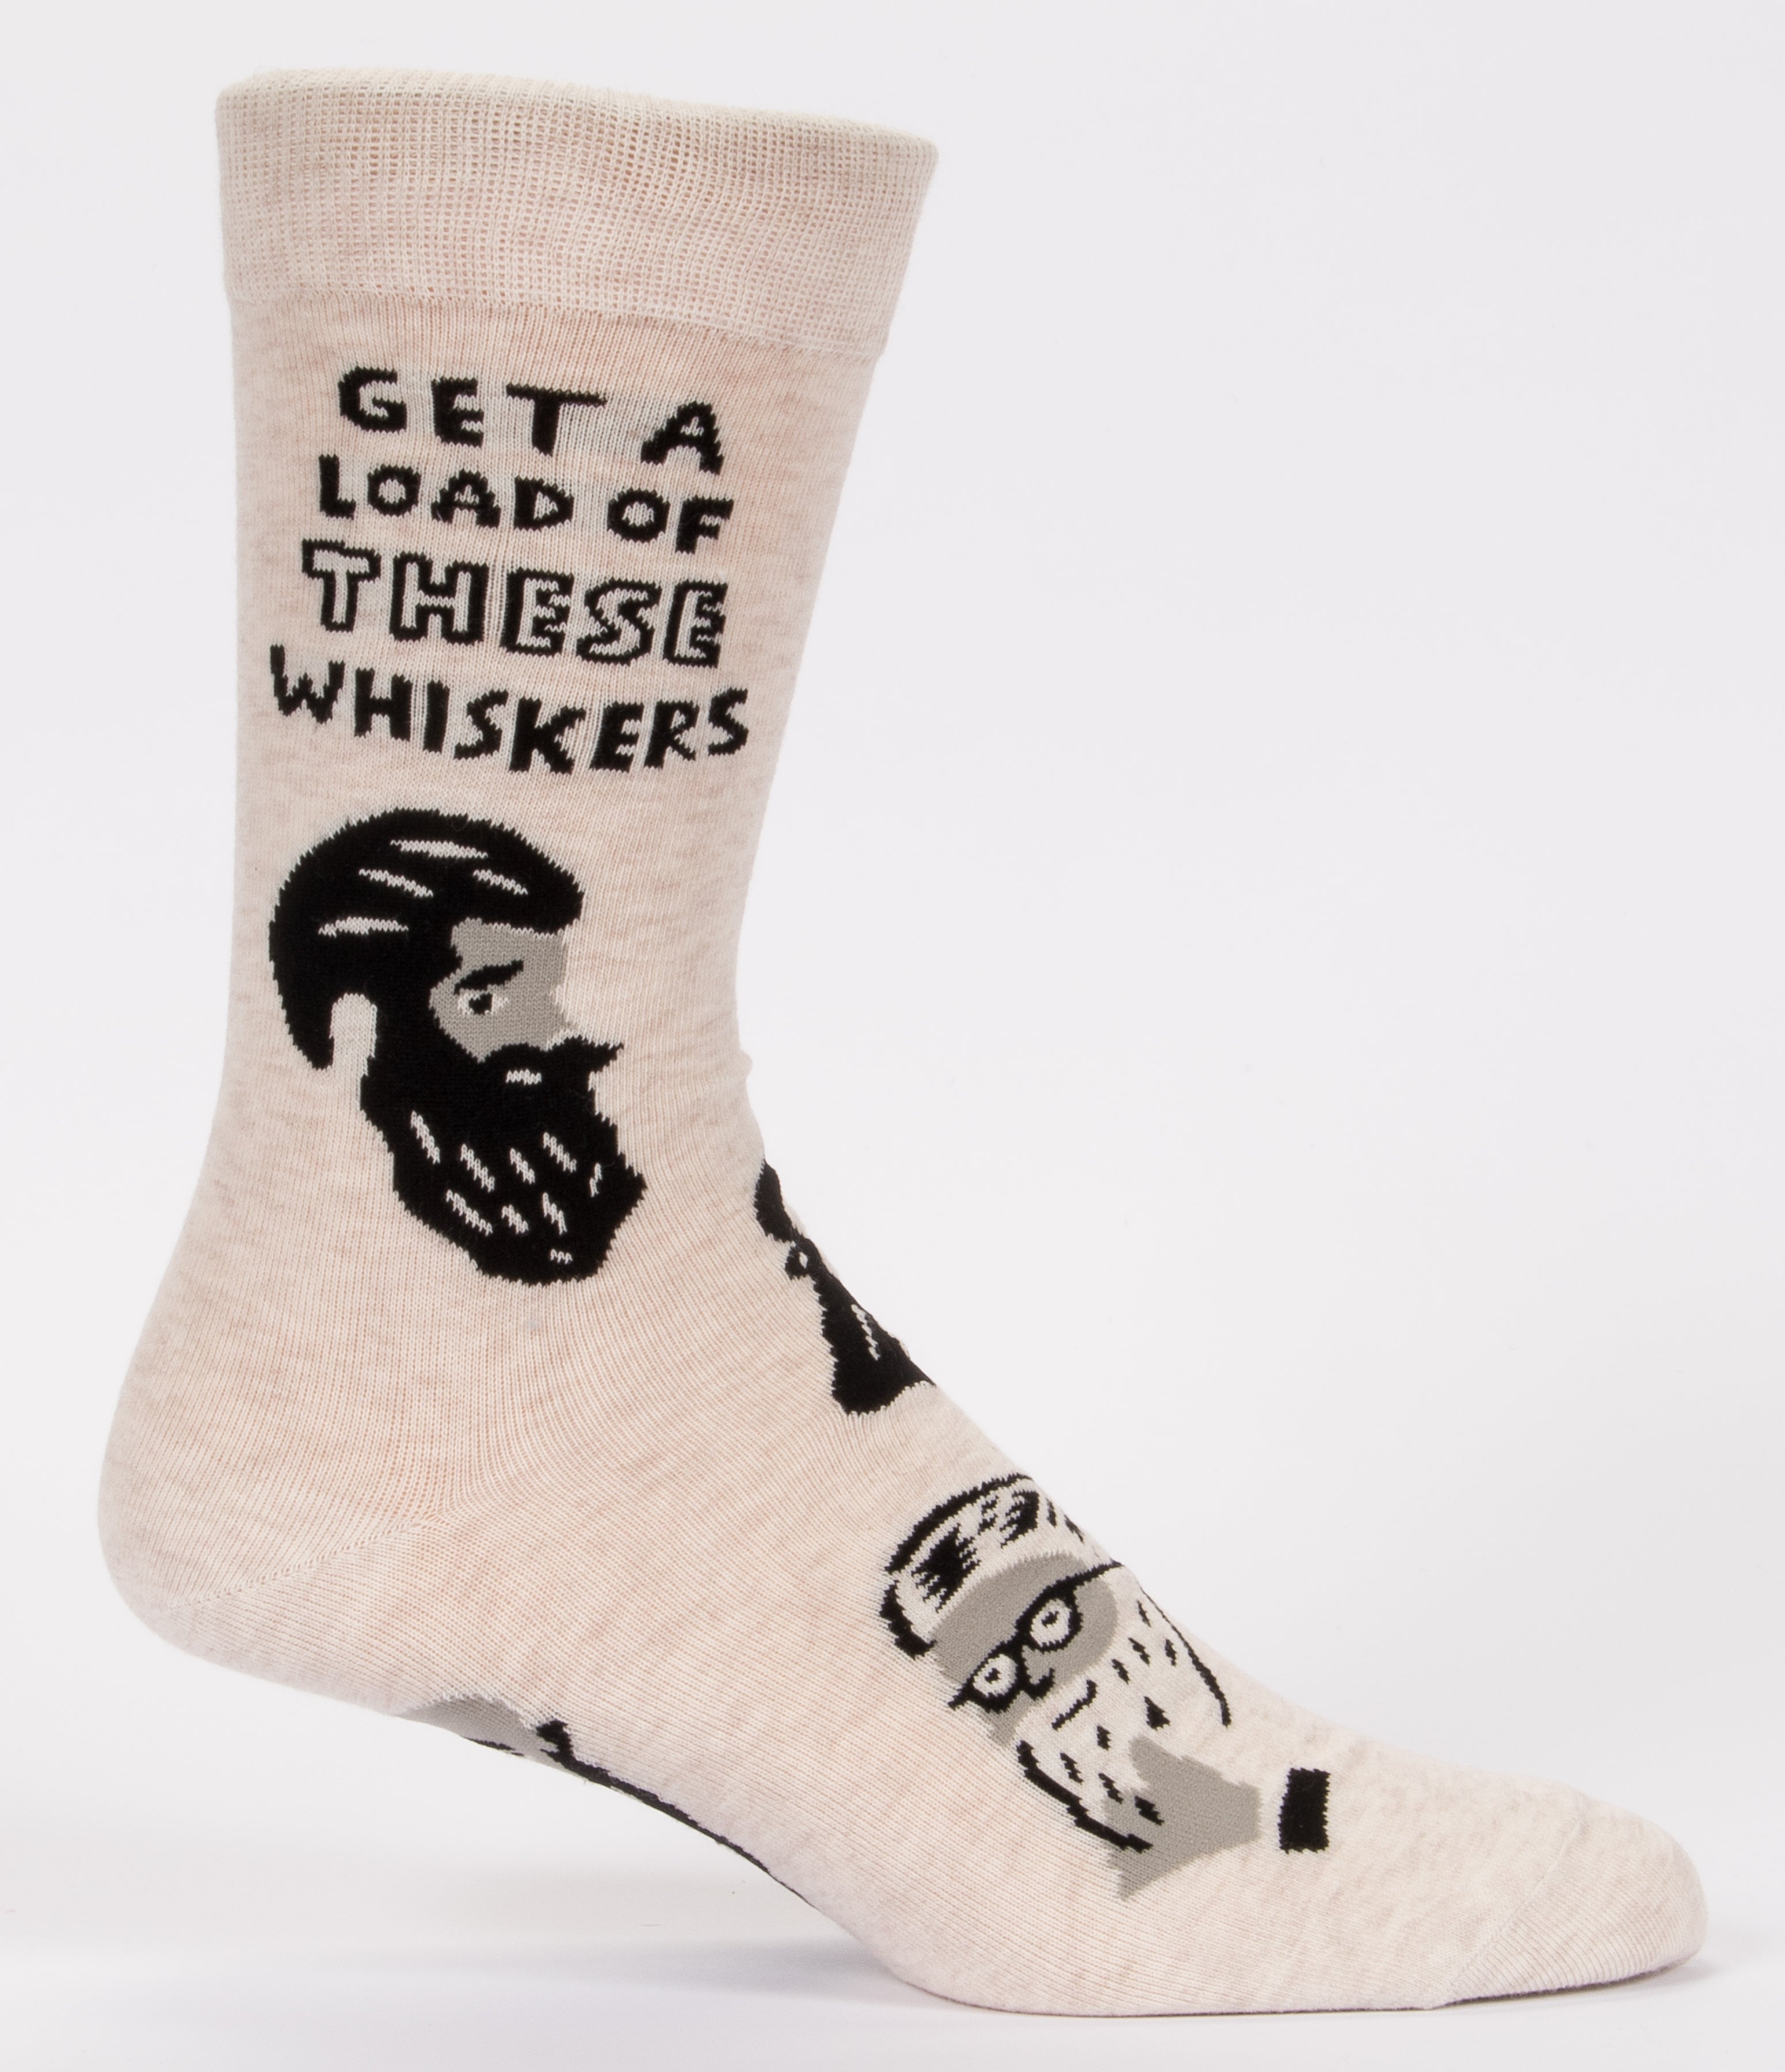 BlueQ Men's Crew Socks: Get A Load of These Whiskers